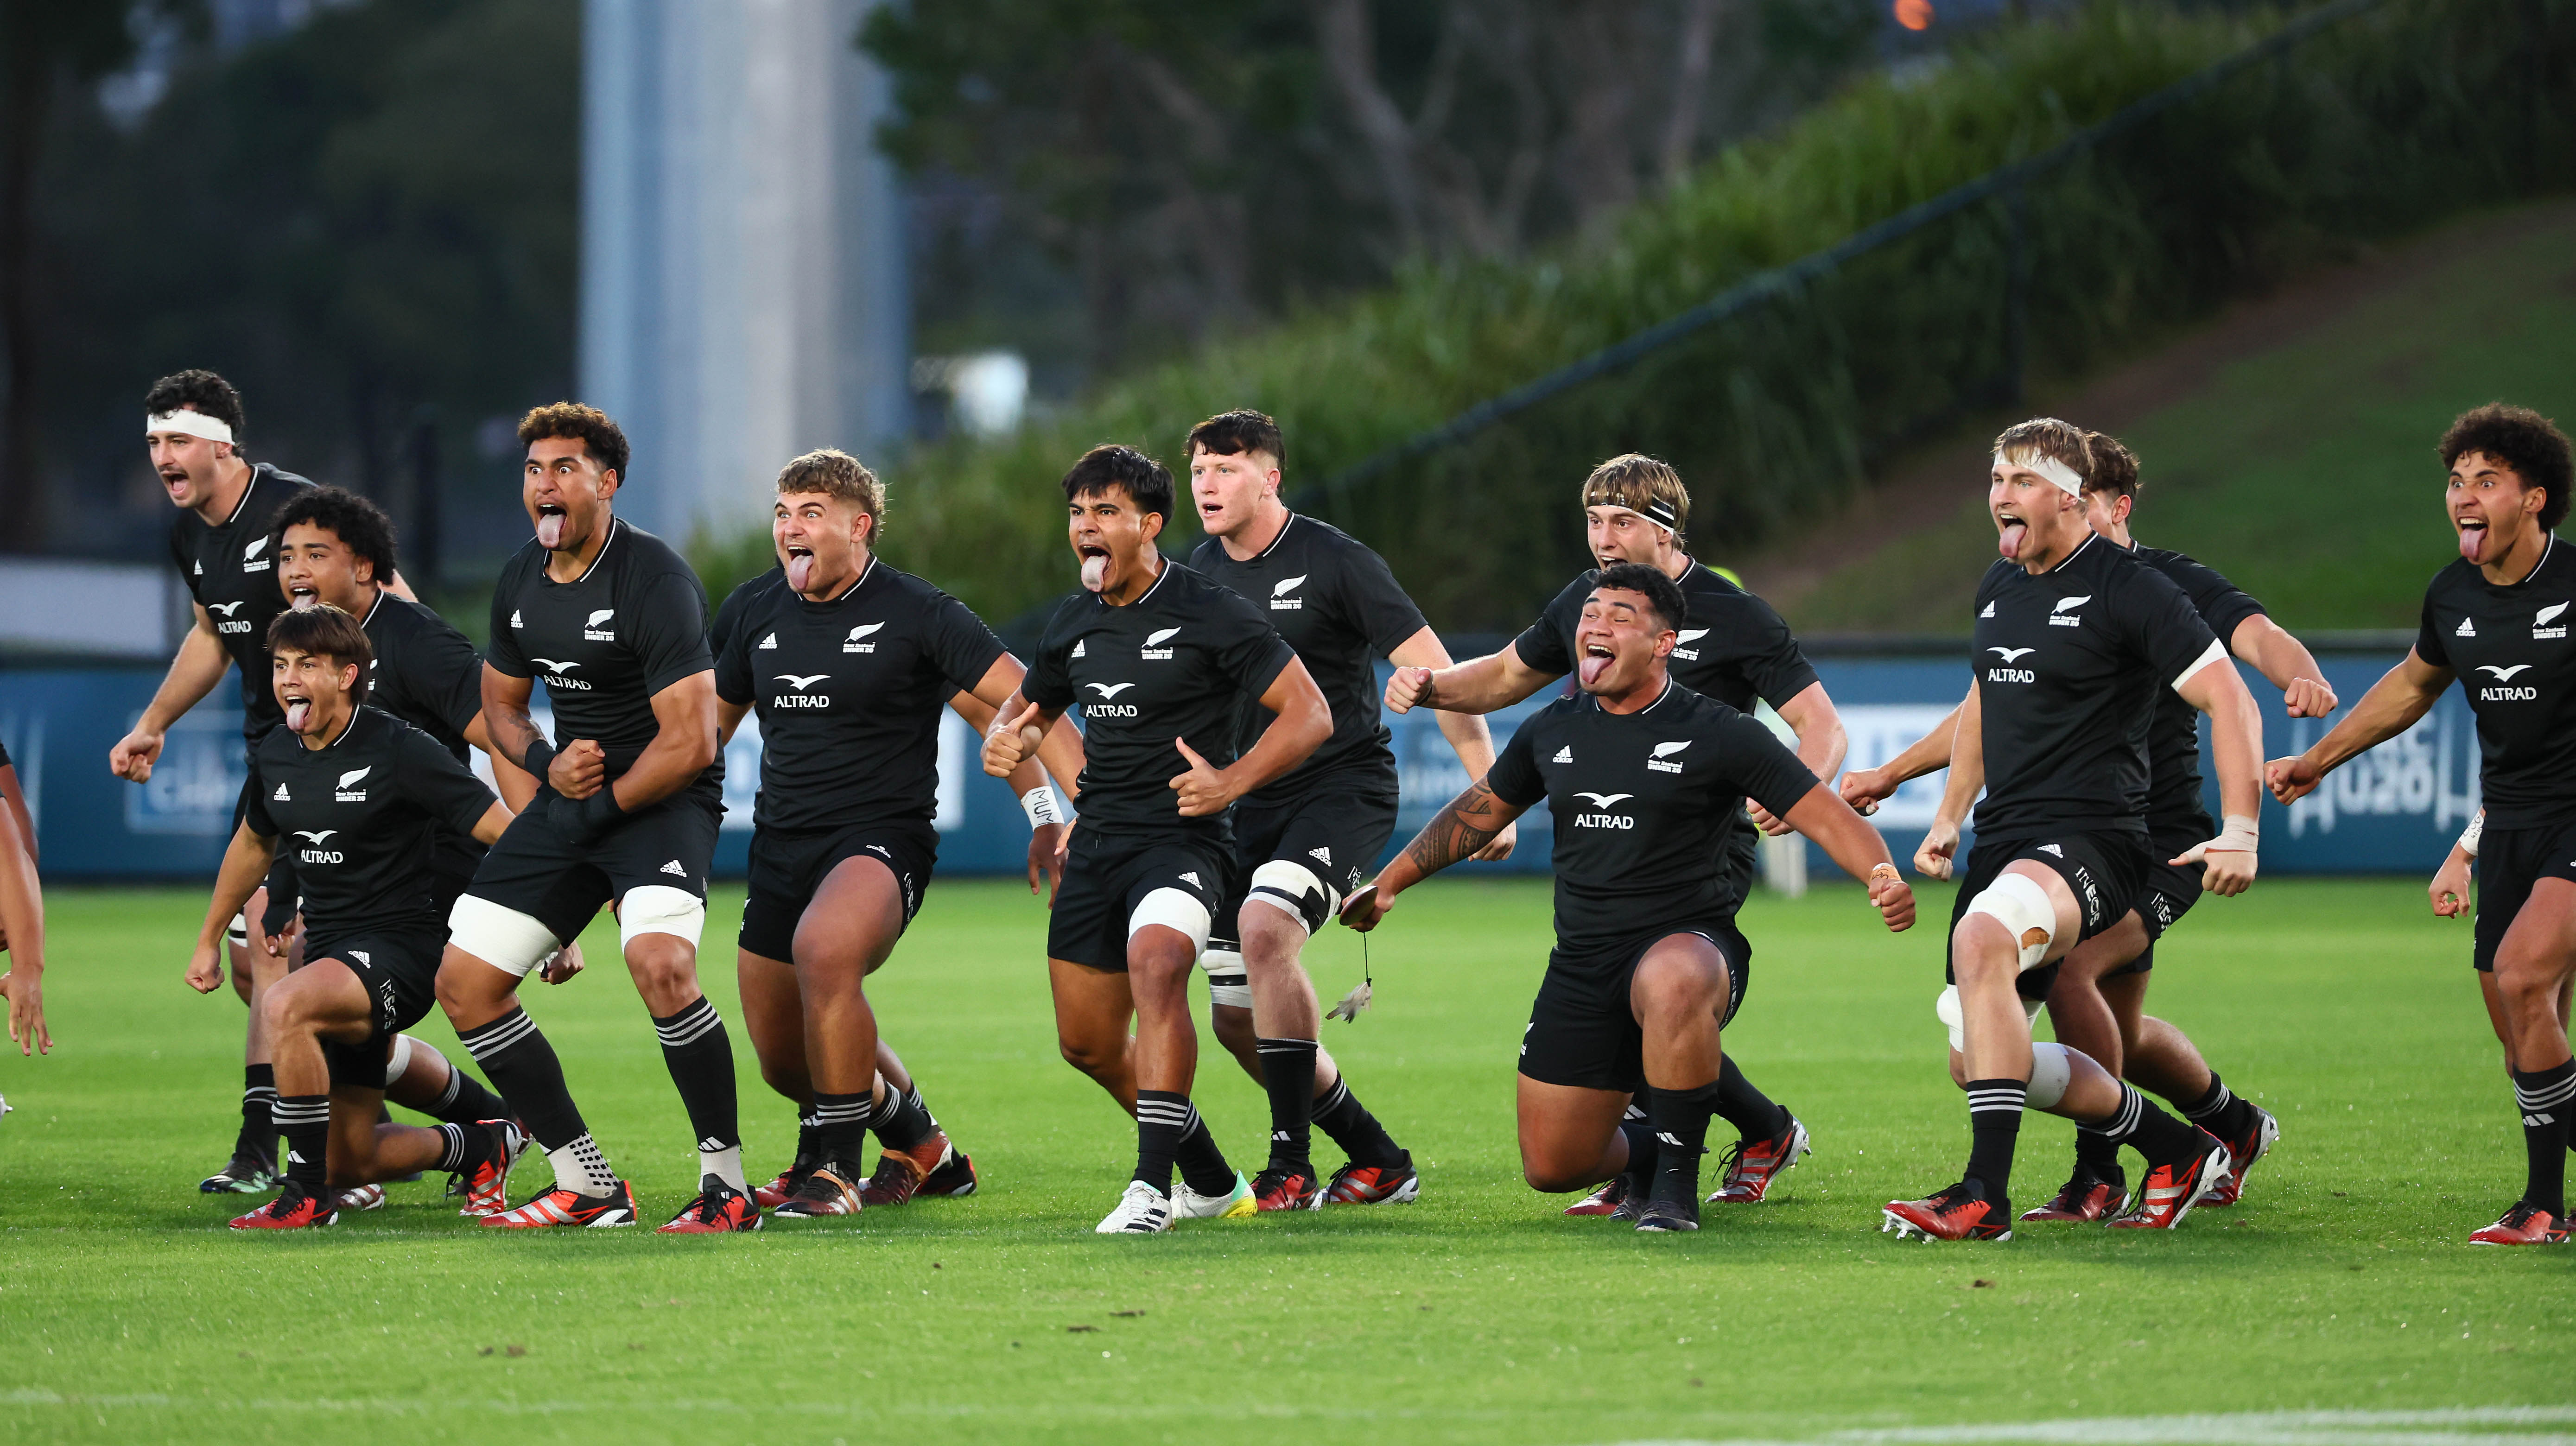 New Zealand Under 20 drawn in tough pool at the World Rugby Under 20 Championships